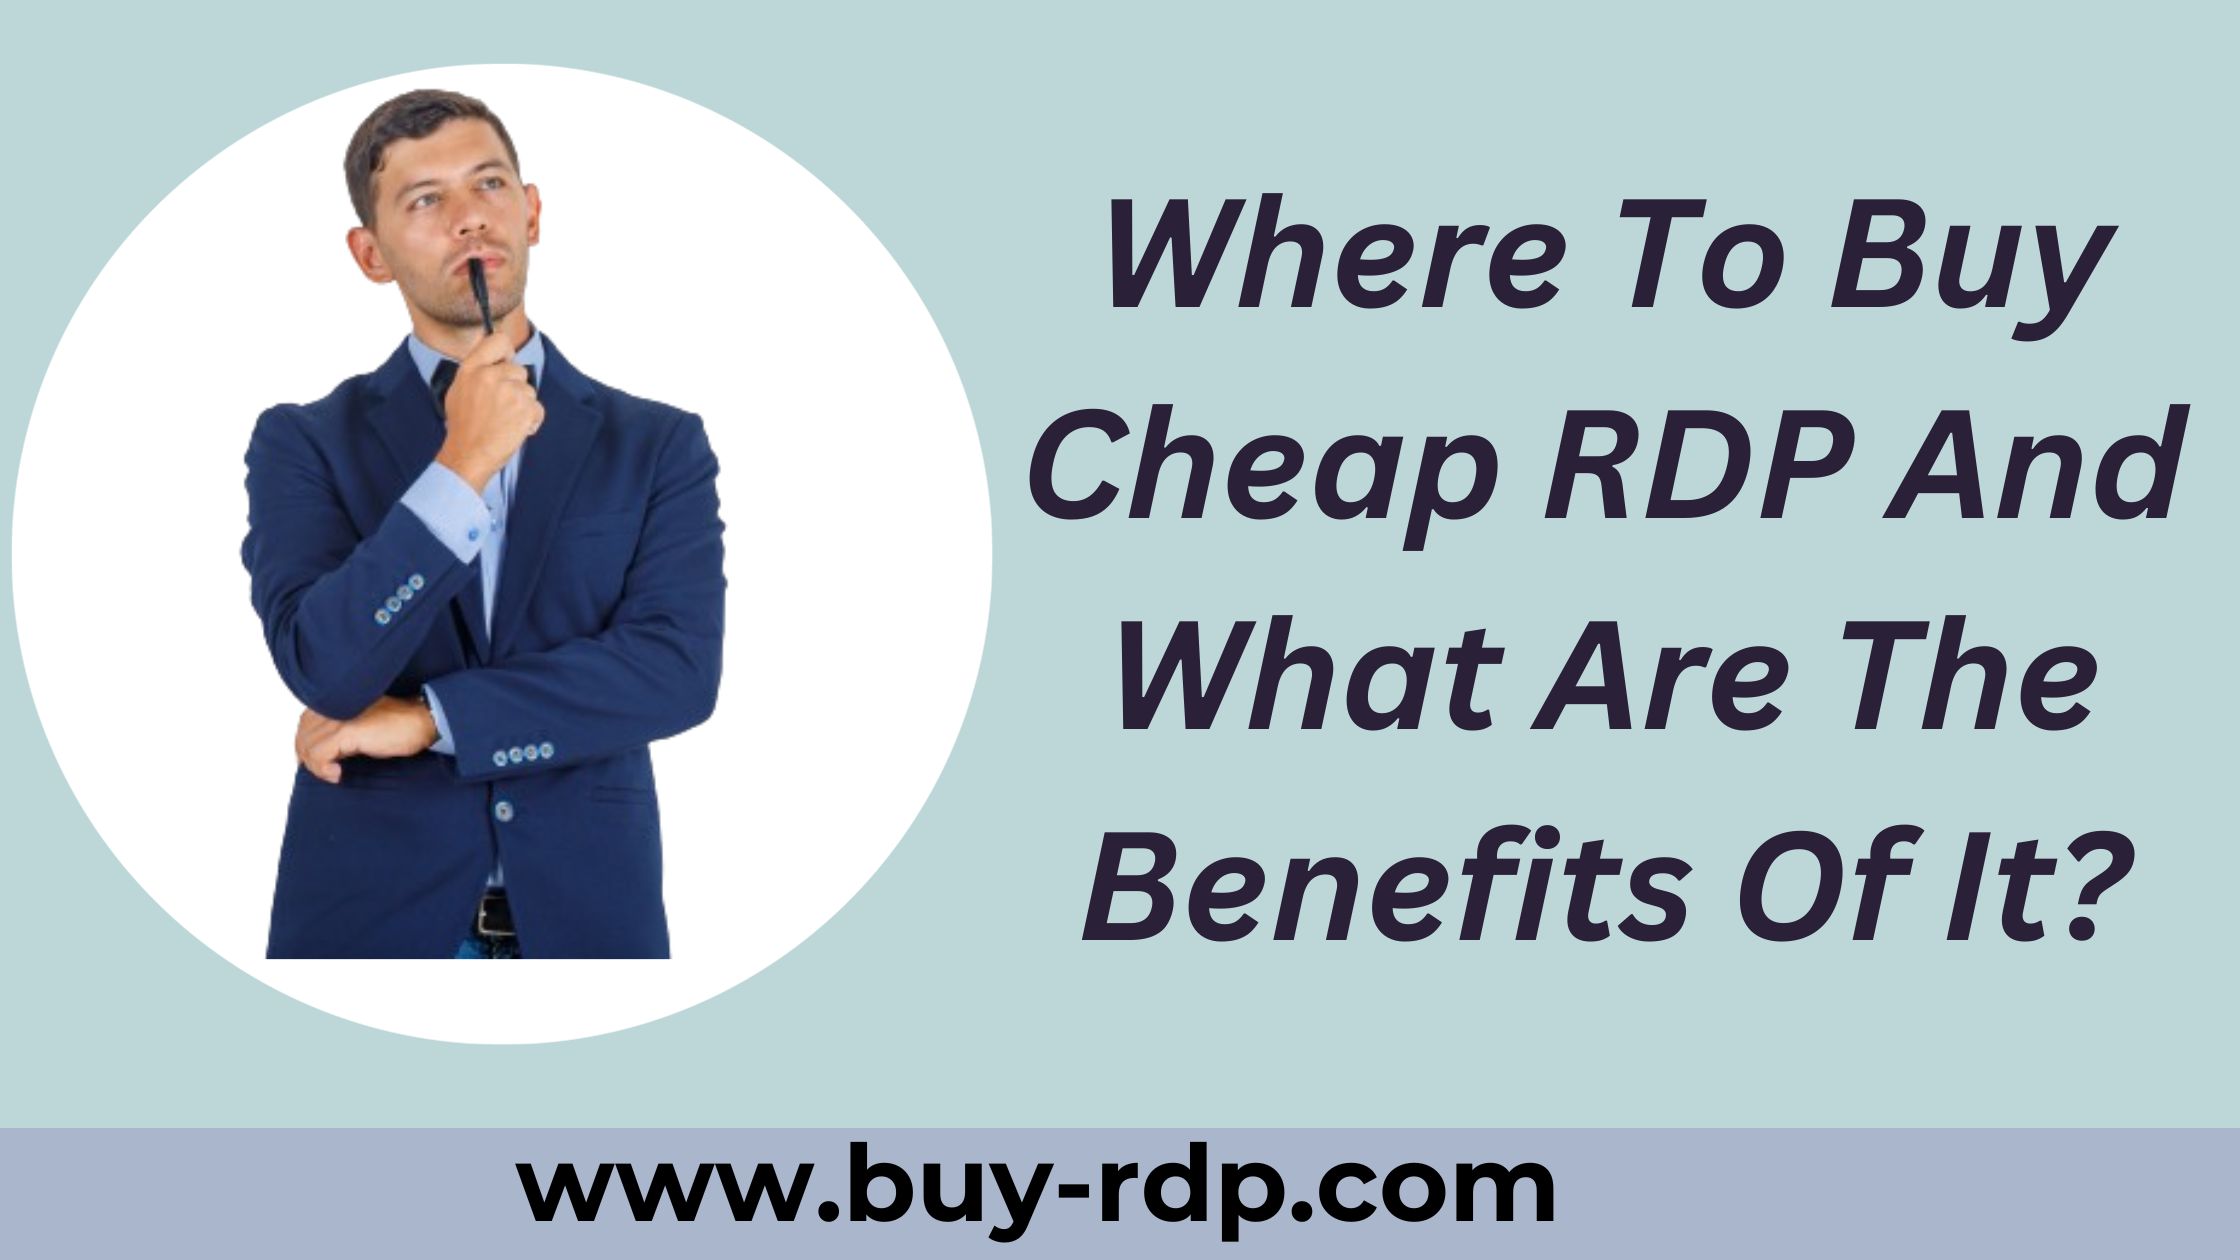 Where To Buy Cheap RDP And What Are The Benefits Of It? 